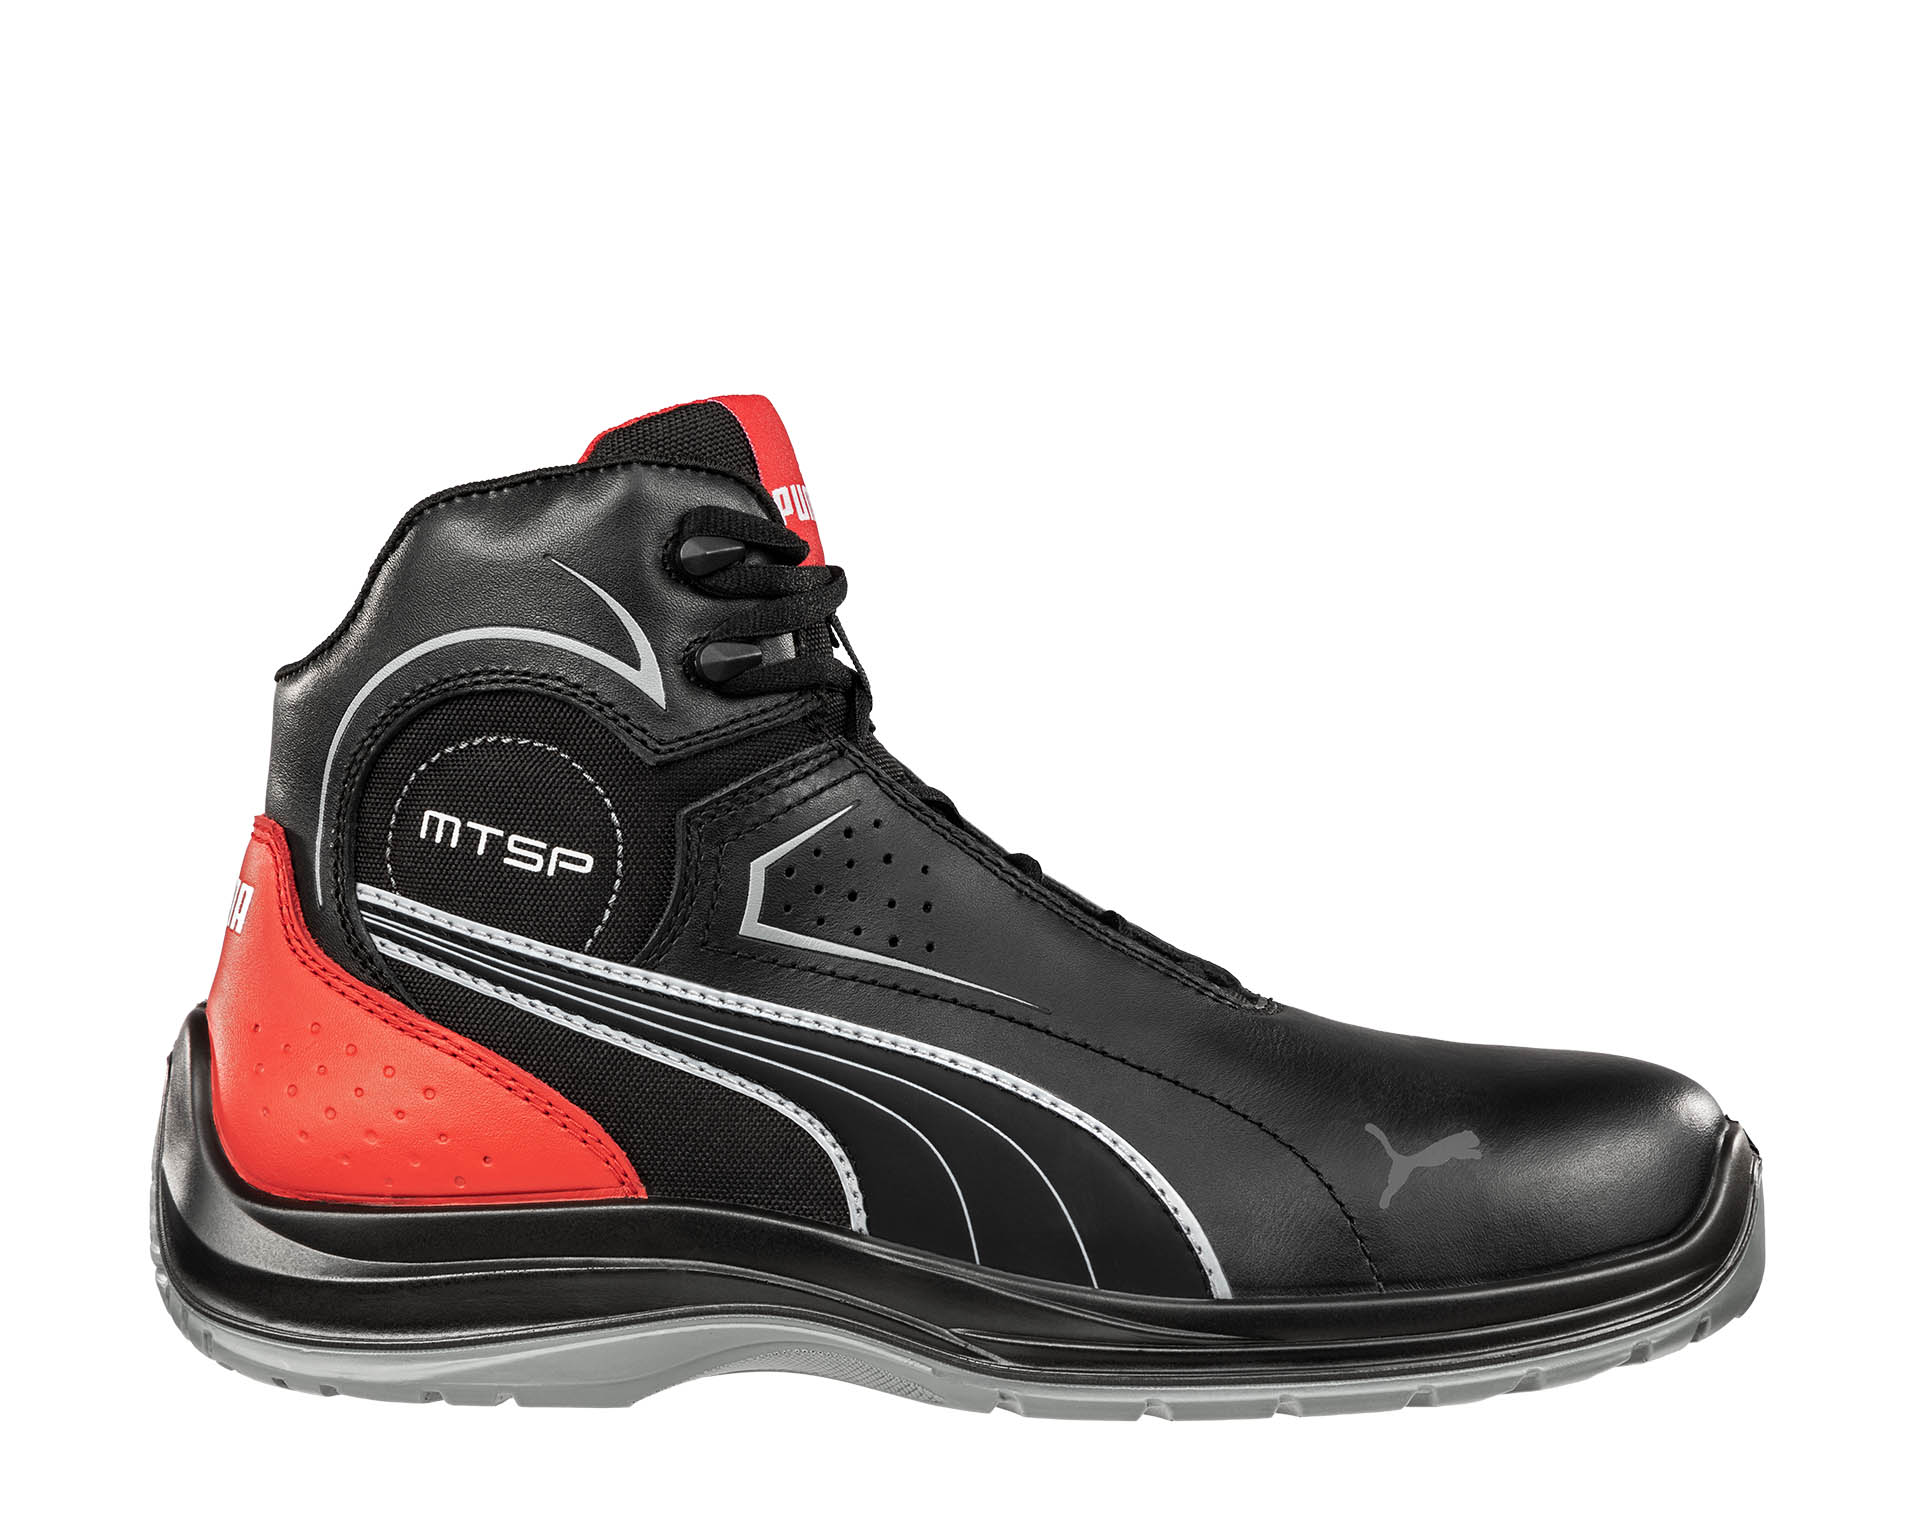 TOURING BLACK Puma EH SAFETY Safety MID|PUMA SR work shoes ASTM USA 